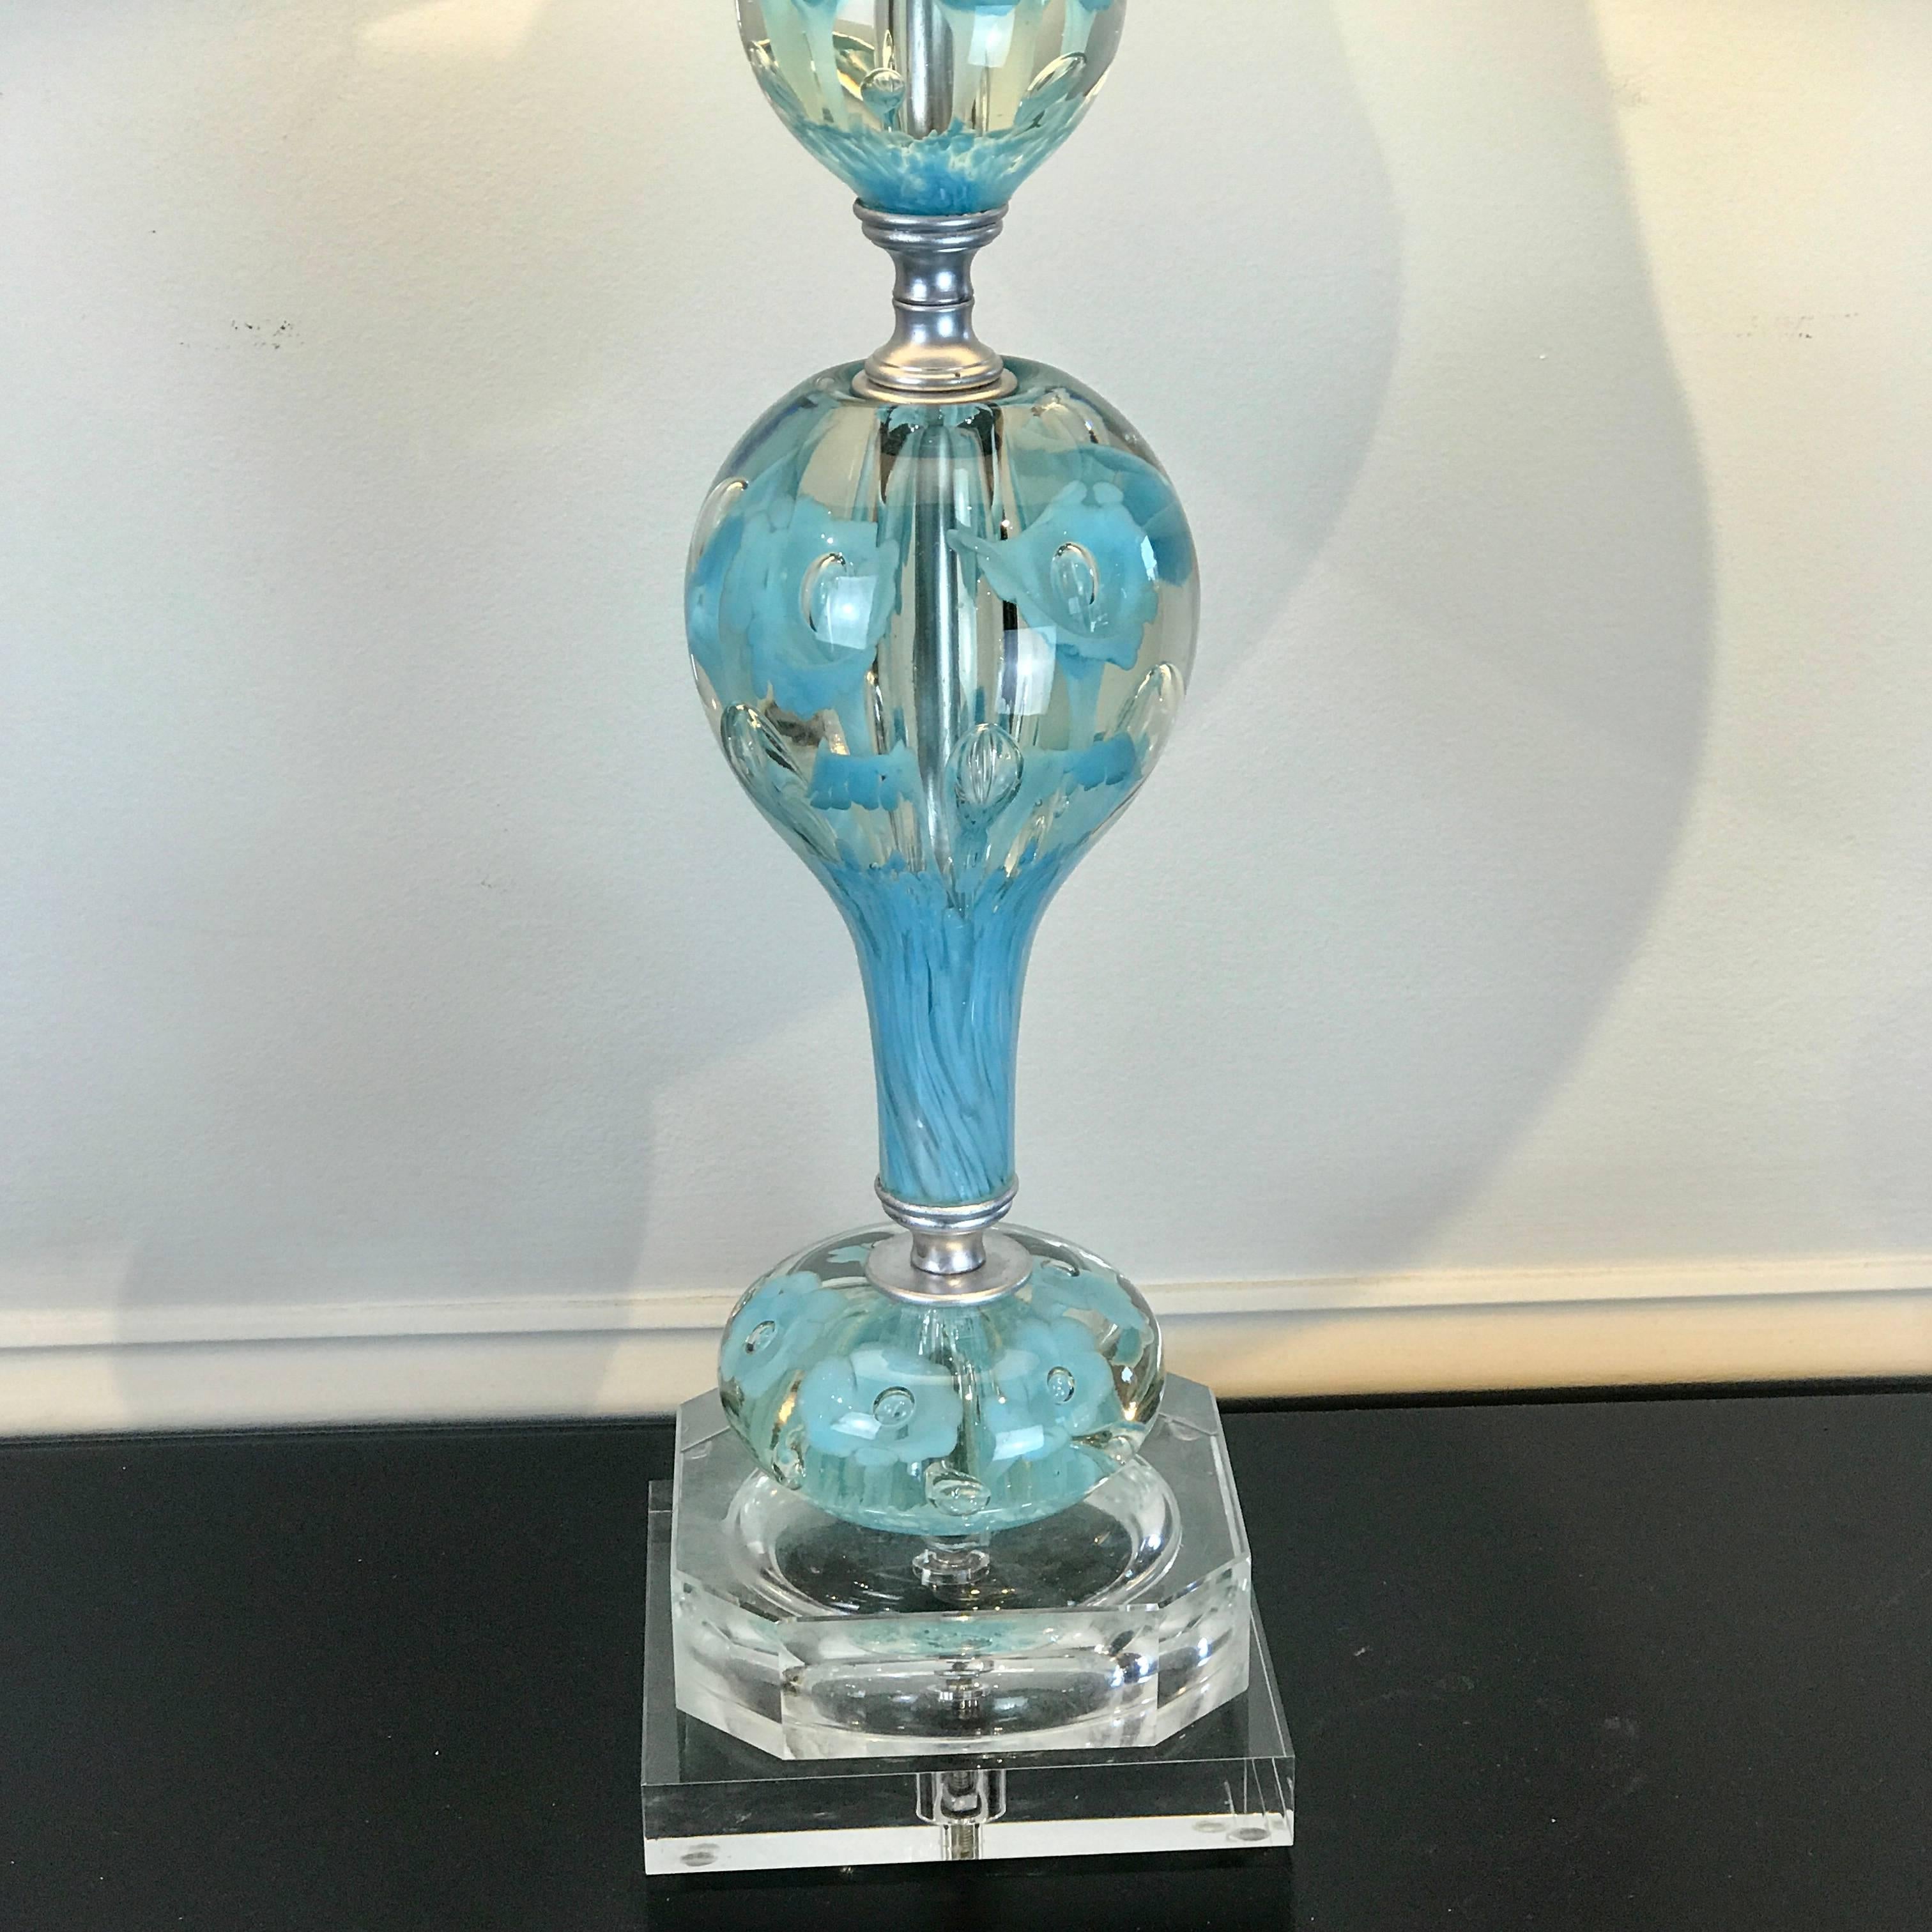 Midcentury Murano Style Glass and Brass Lamps in Turquoise In Excellent Condition For Sale In Atlanta, GA